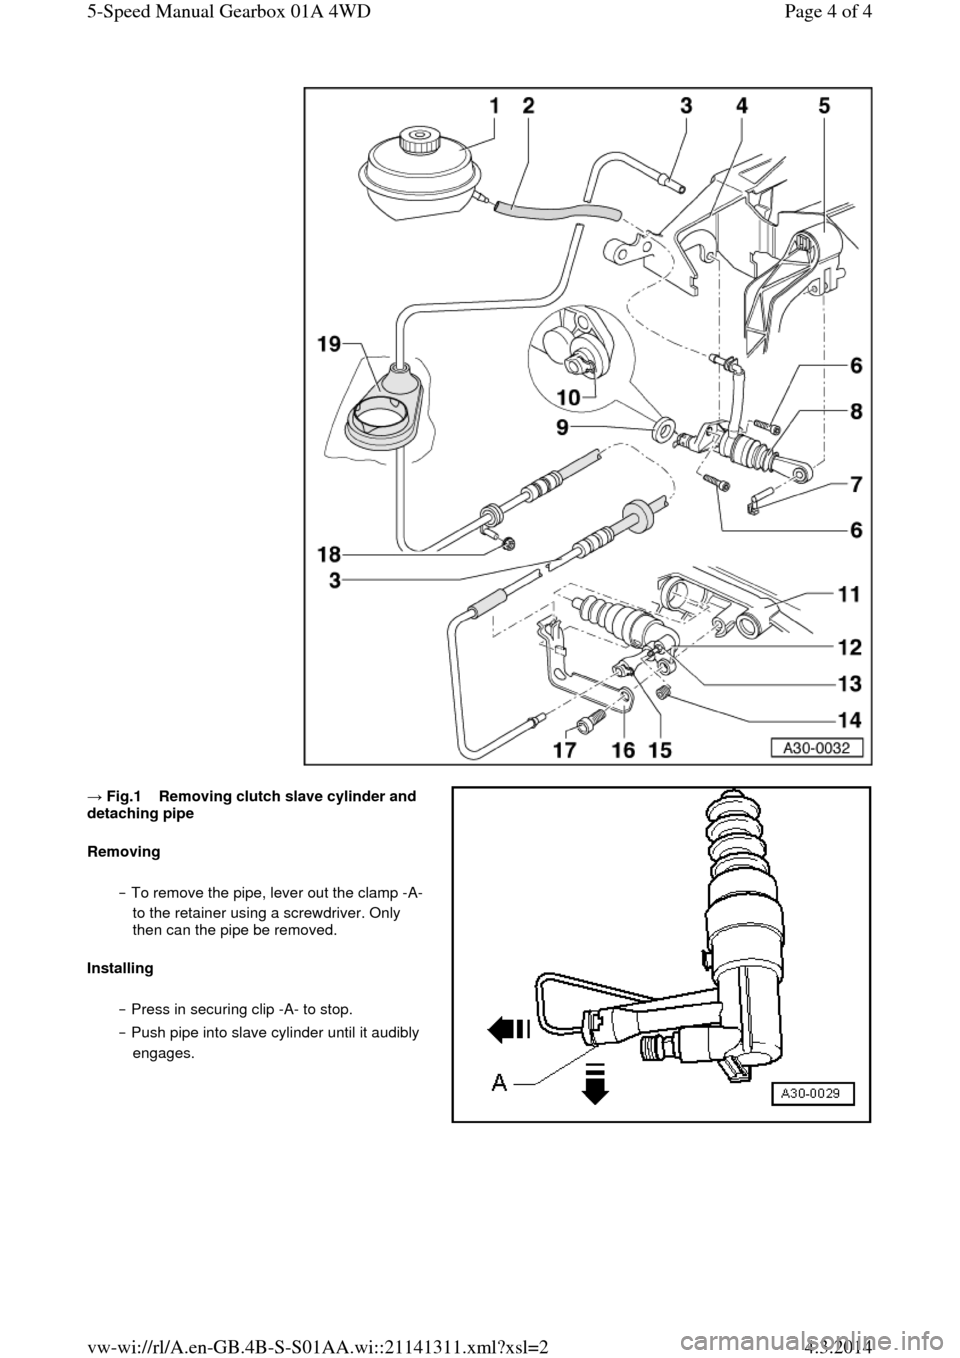 AUDI A6 2000 C5 / 2.G Changing Clutch 5Speed Manual Gearbox  → Fig.1    Removing clutch slave cylinder and detaching pipe 
Removing 
‒ To remove the pipe, lever out the clamp -A- 
to the retainer using a screwdriver. Only 
then can the pipe be removed.  
I